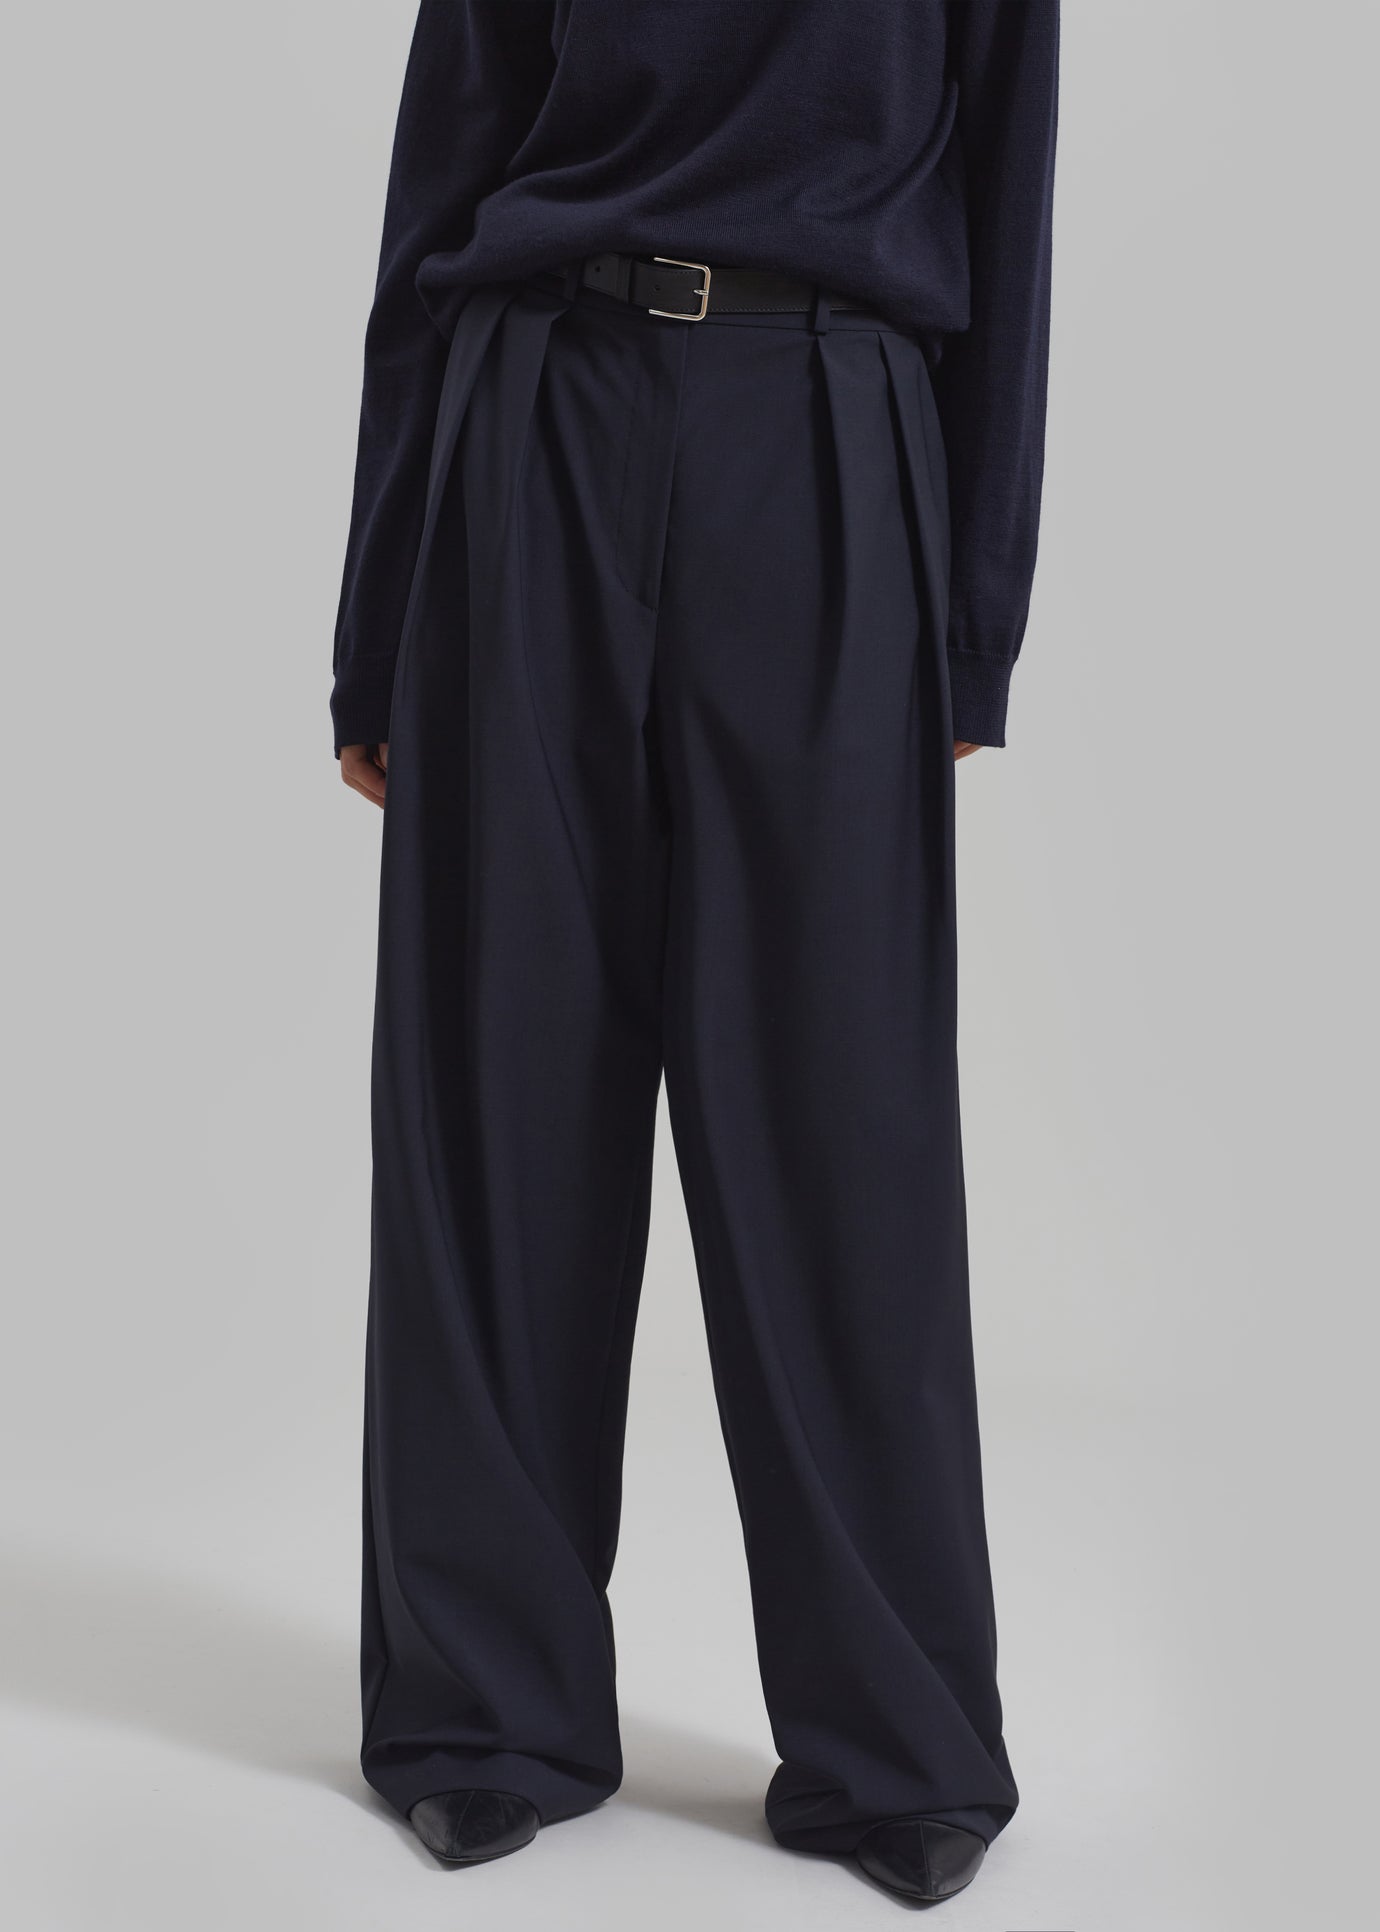 Ripley Pleated Trousers - Navy - 1